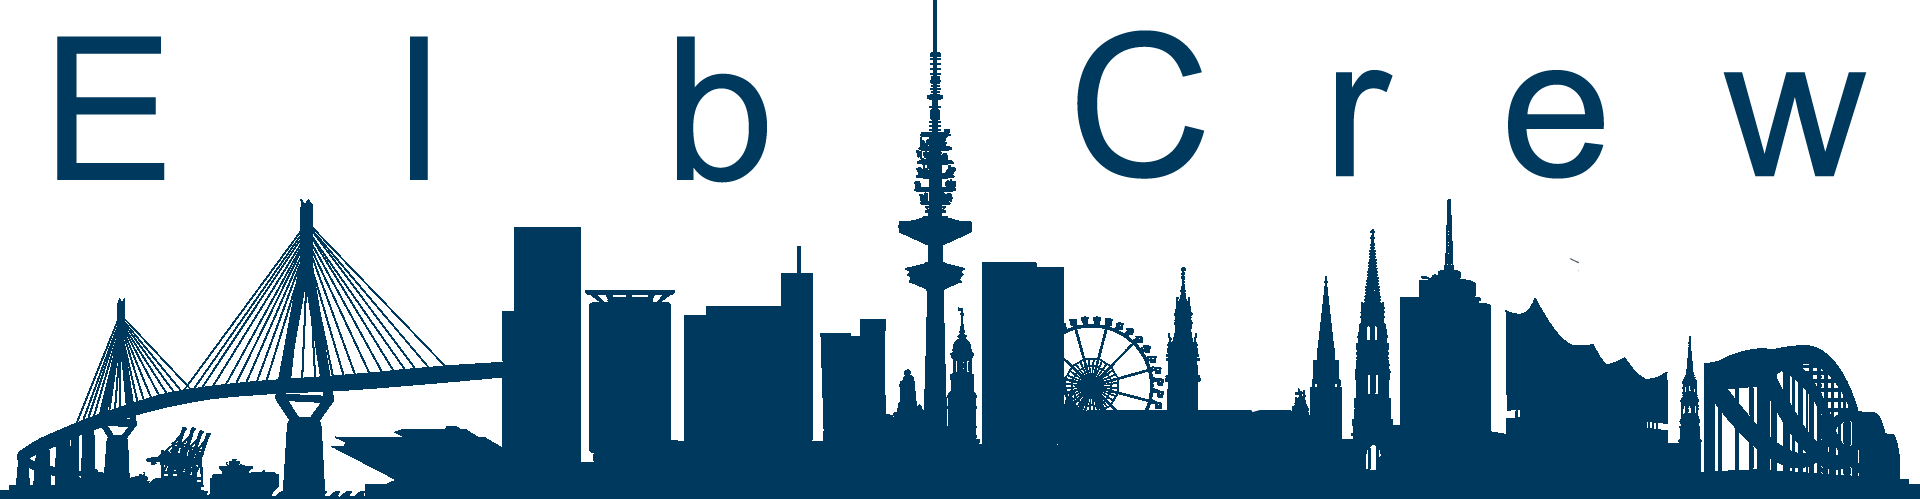 elbcrew-consulting-logo---blue-1920x499.png